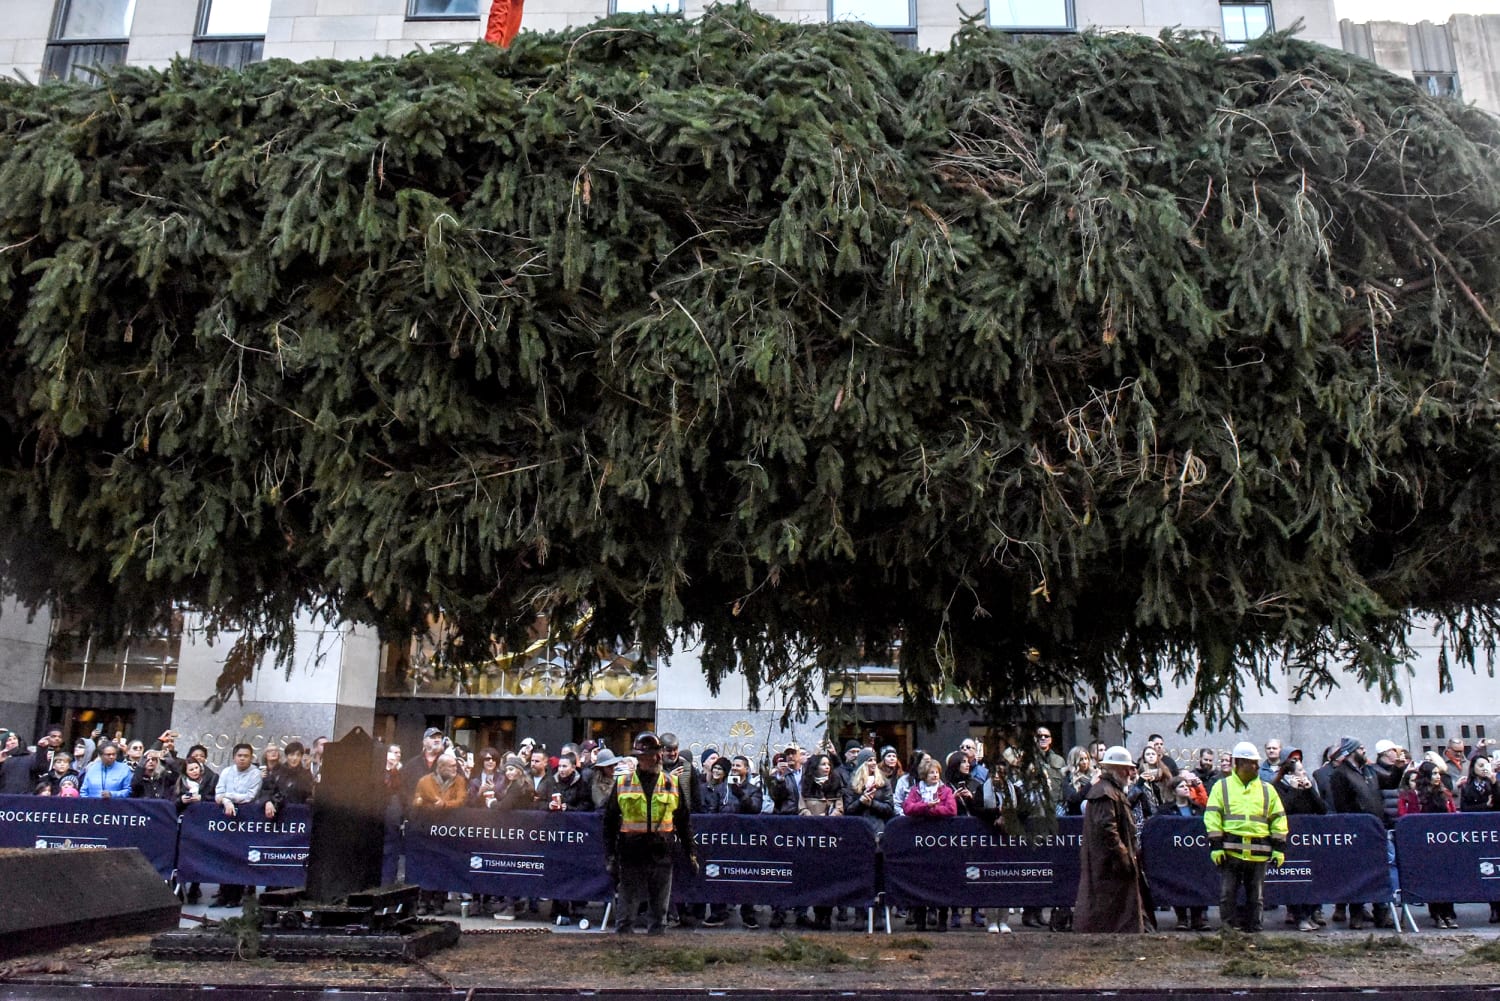 The Rockefeller Christmas Tree's journey from upstate to the plaza